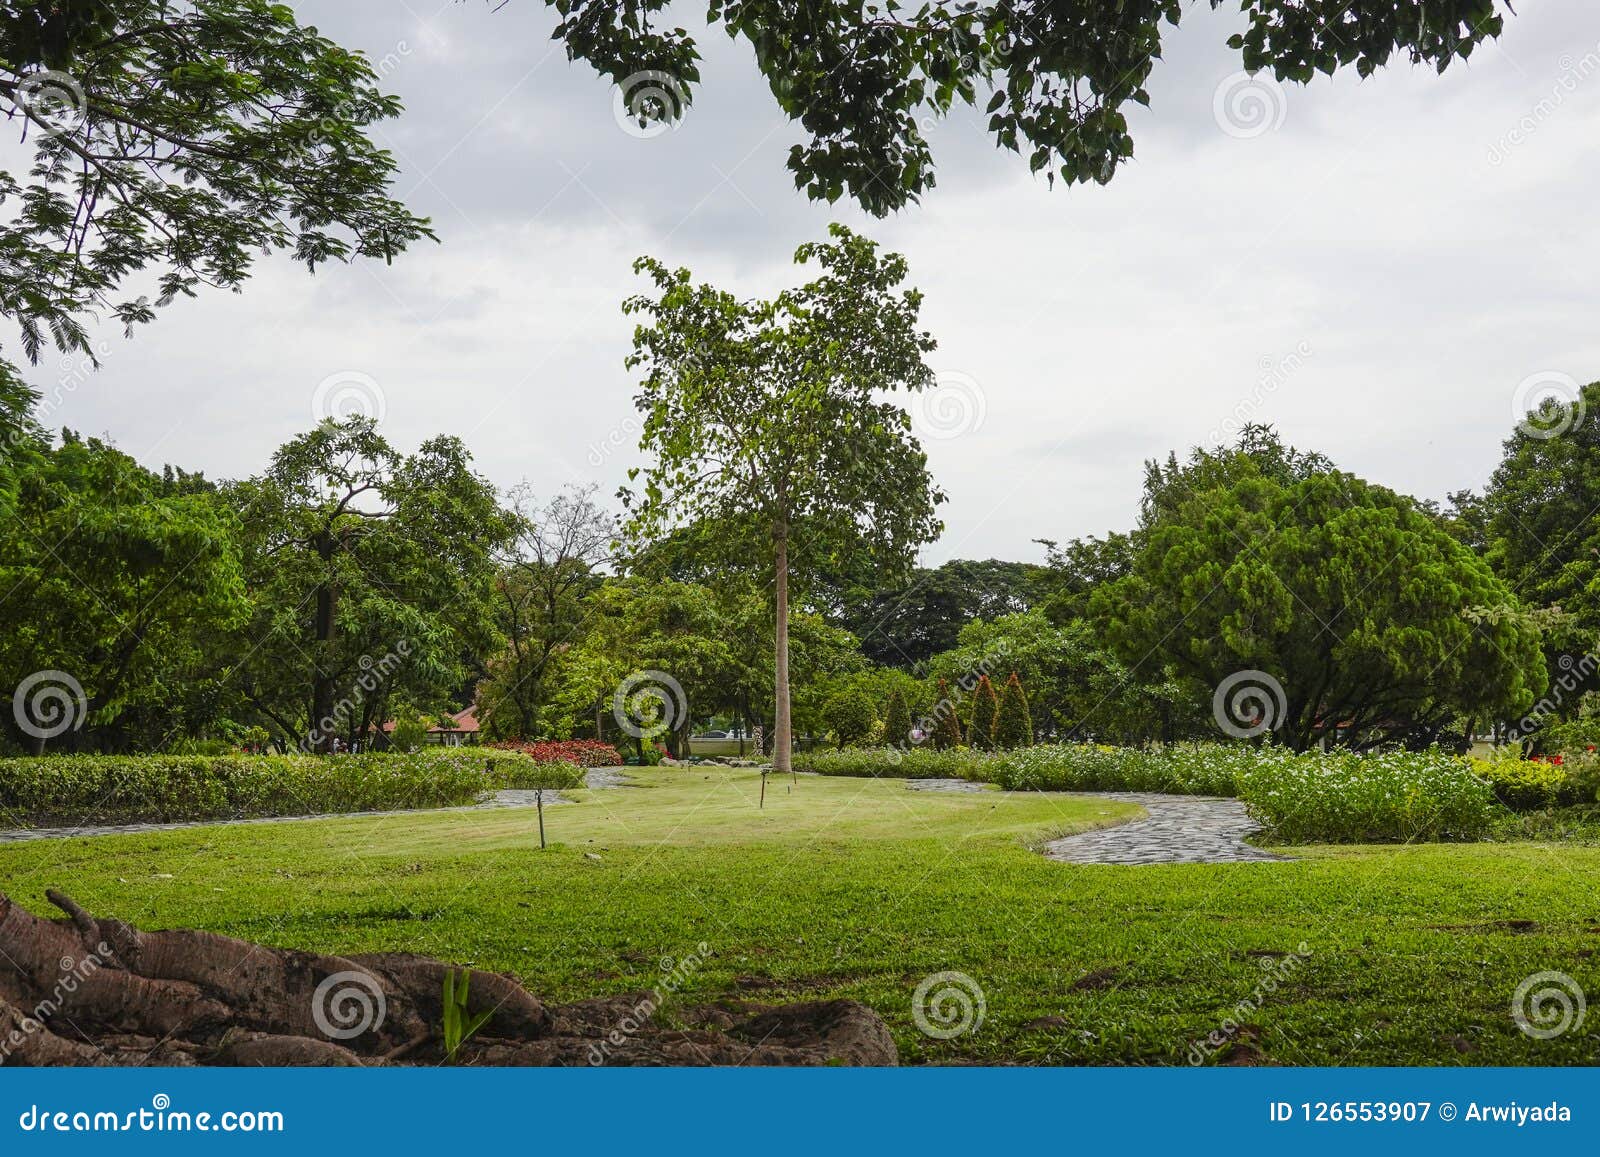 Green Beautiful National Park and Sky in Evening Stock Image - Image of ...